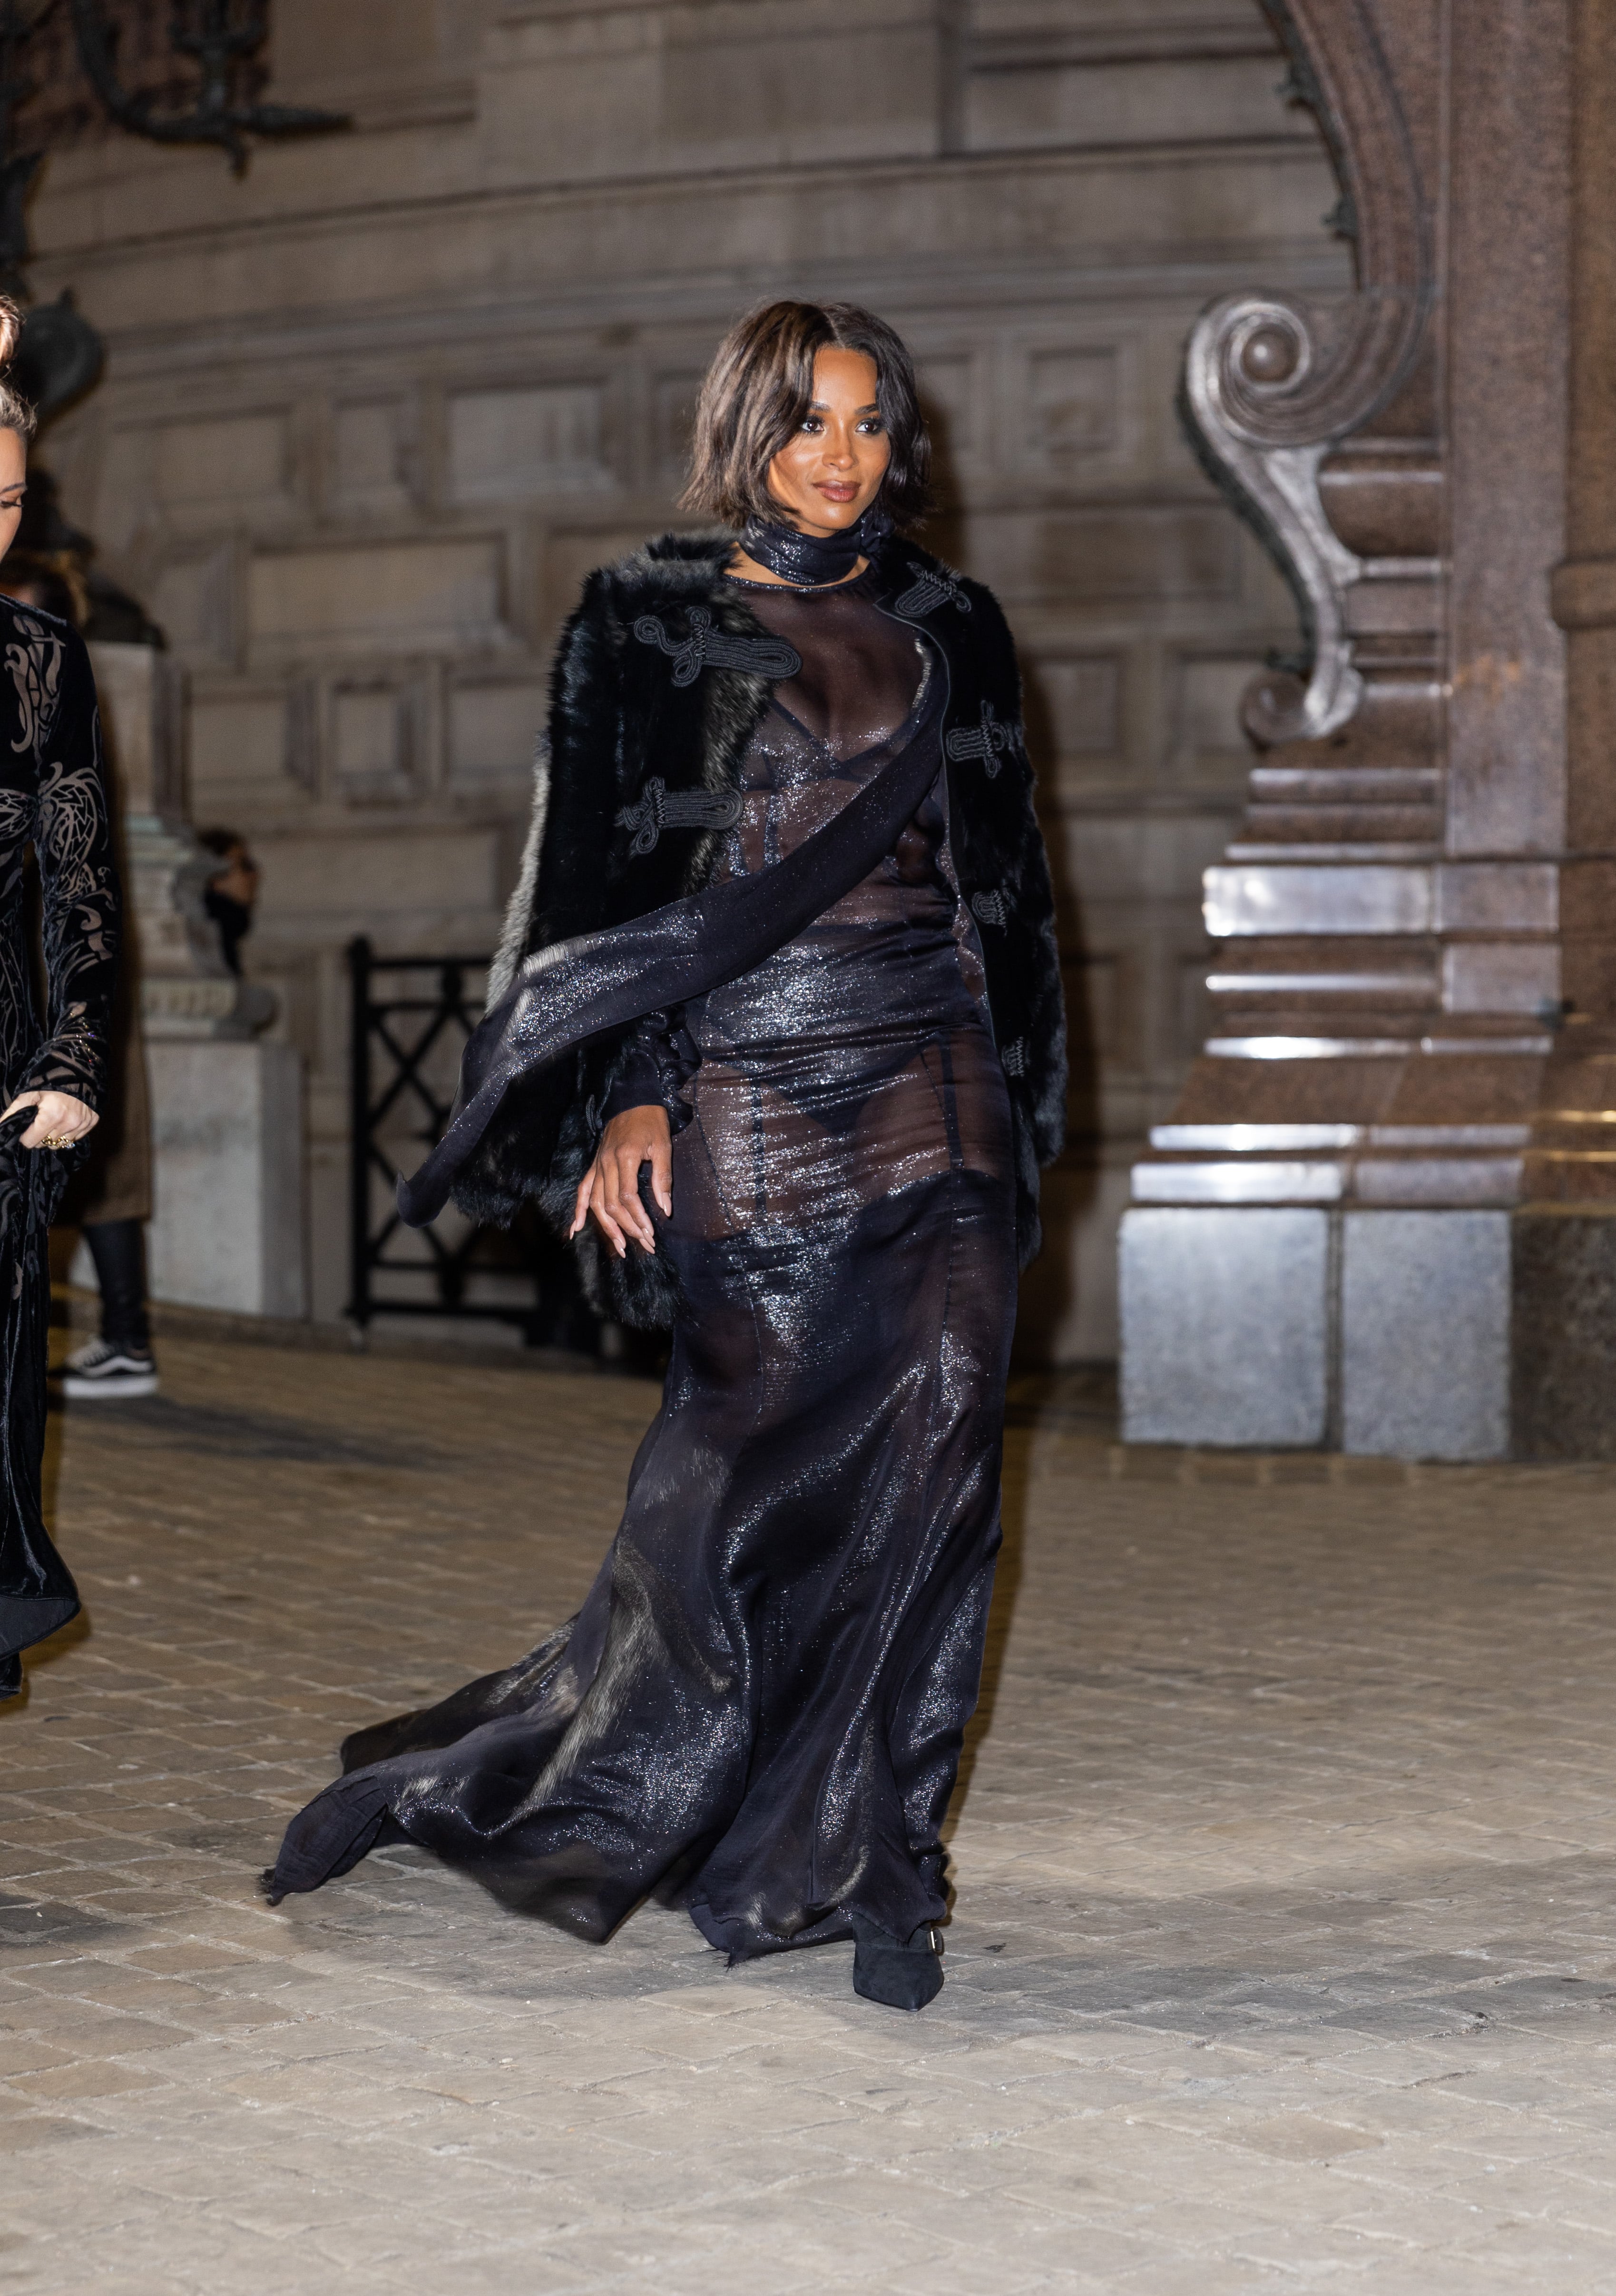 Ciara shows off her sensational figure in a sparkling sheer dress at Paris  Fashion Week